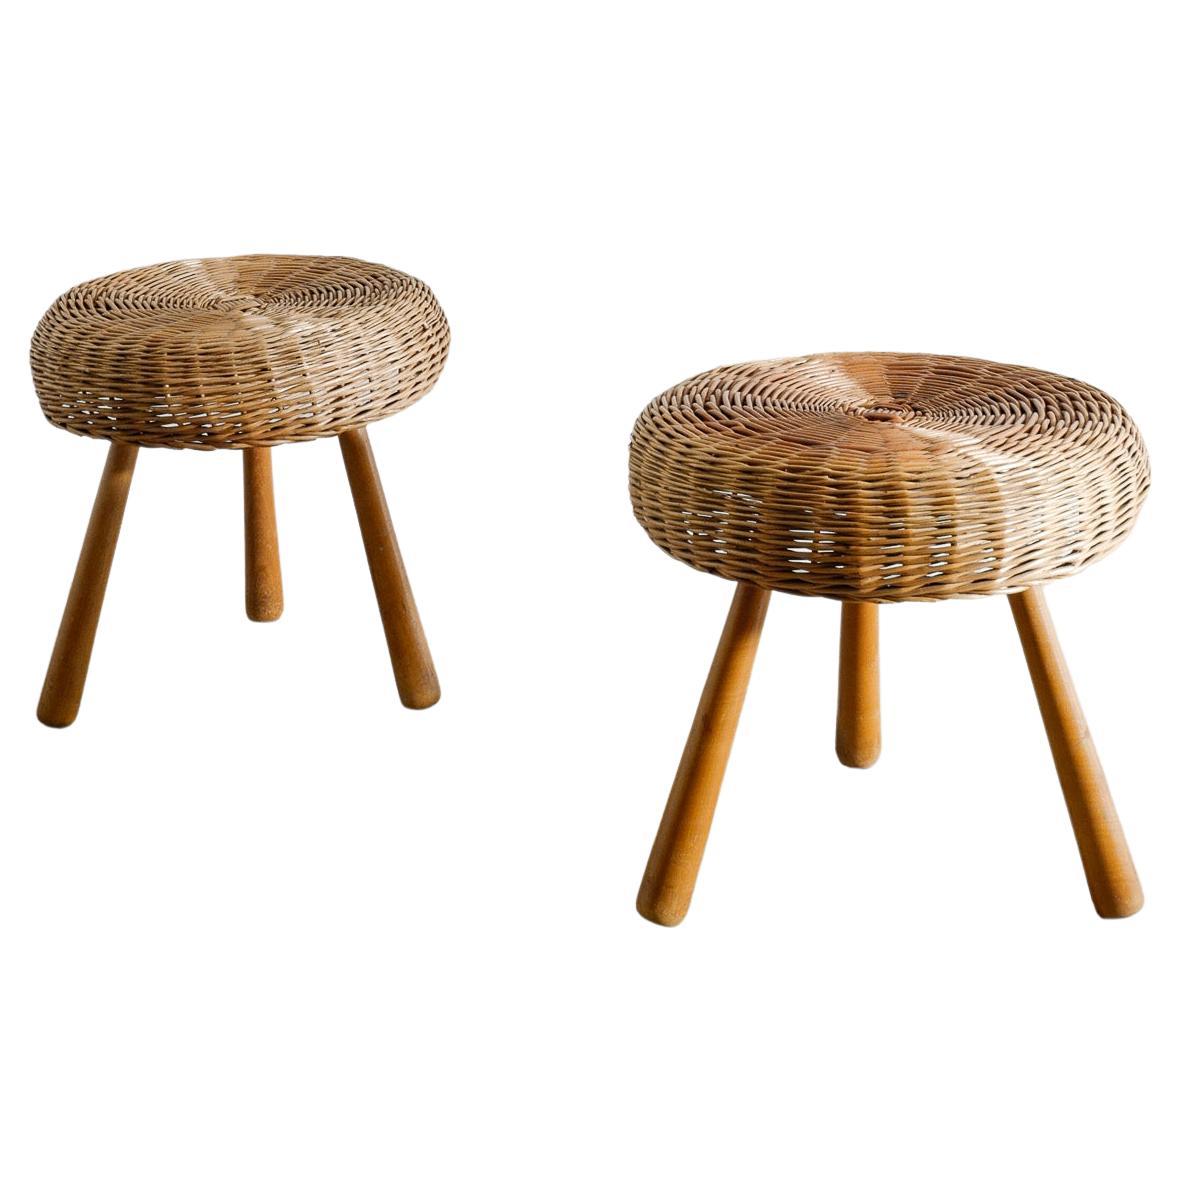 Pair of Mid Century Wooden & Wicker Rattan Stools in style of Tony Paul, 1960s  For Sale